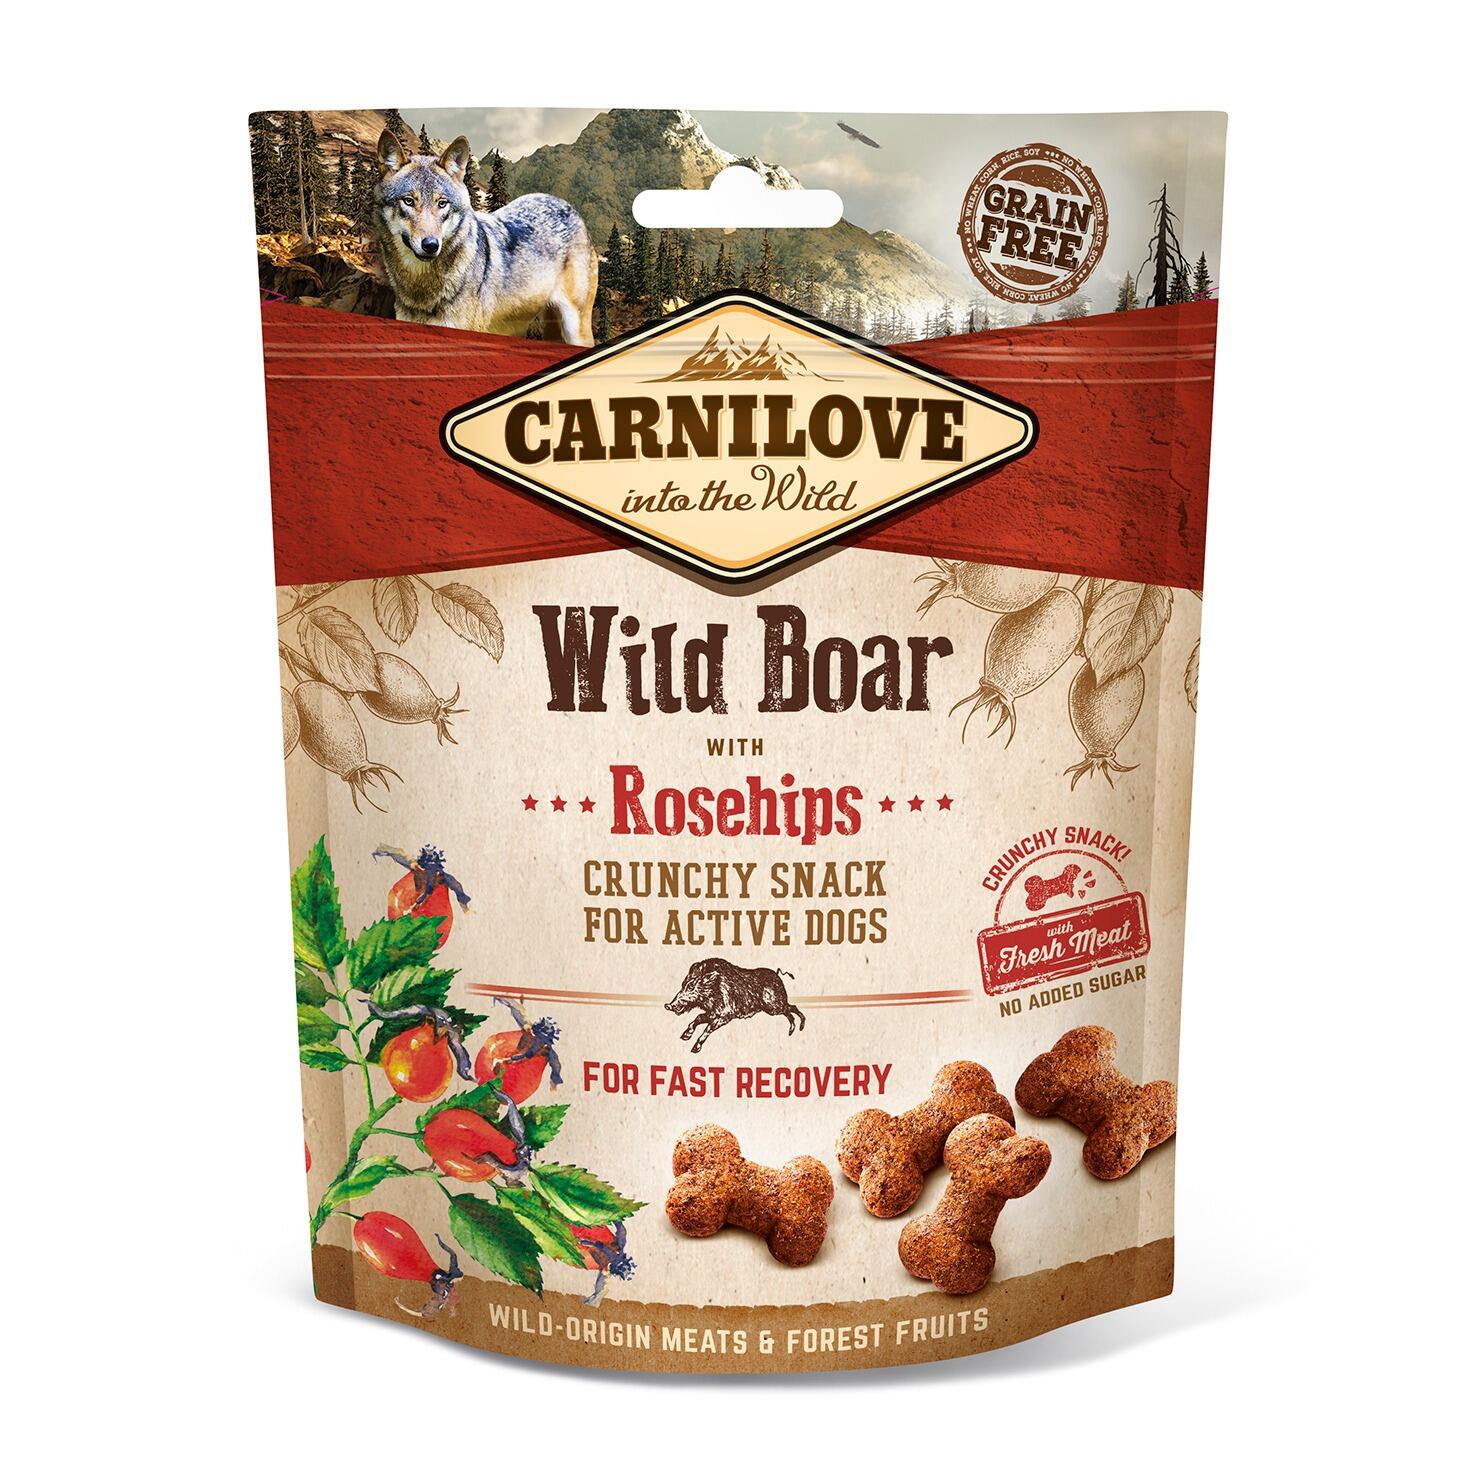 Carnilove Wild Boar with Rosehip Crunchy Snack for Dogs